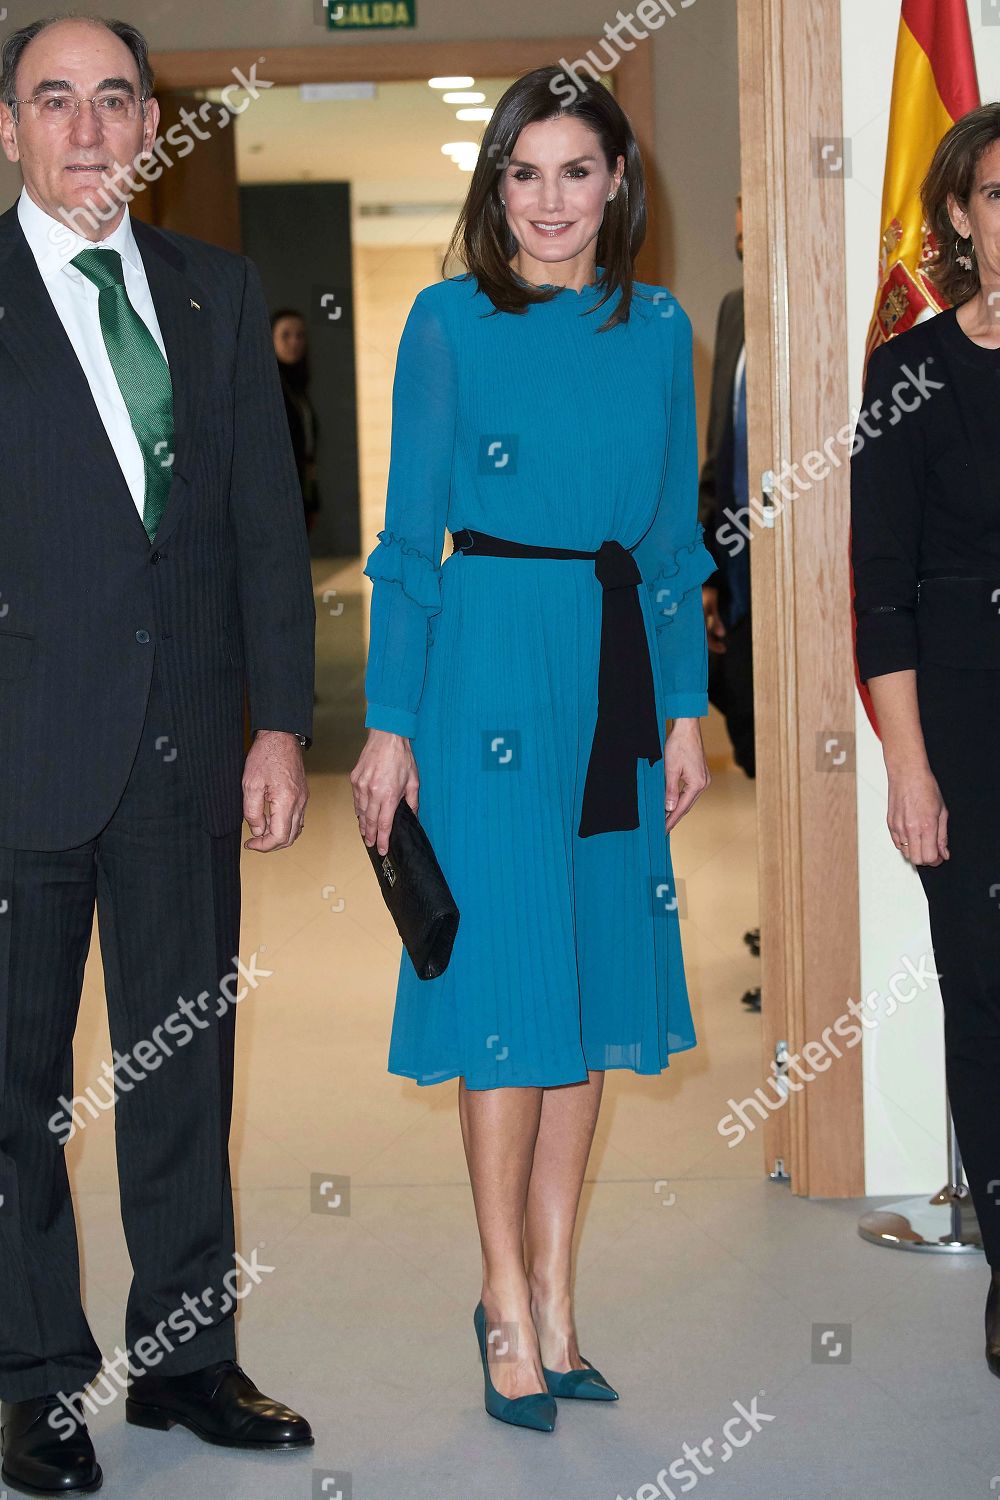 delivery-of-the-grants-for-masters-and-research-aid-of-the-fundacion-iberdrola-madrid-spain-shutterstock-editorial-10079598h.jpg